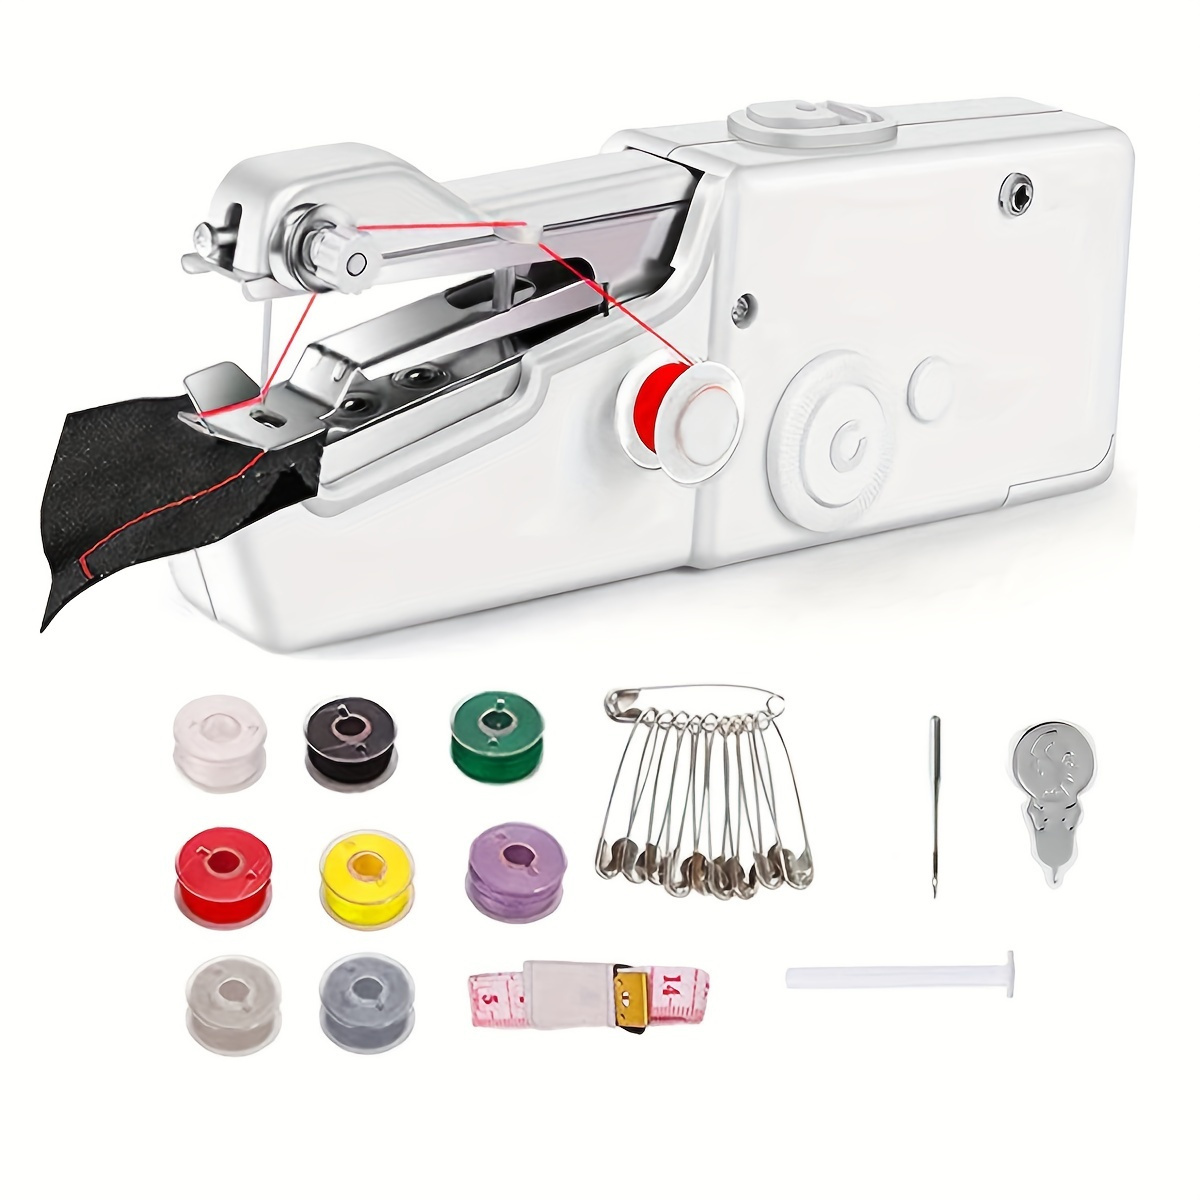 

1pc Portable Electric Hand Sewing Machine, Fast Stitching Mini Sewing Machine For Home, Travel, And Diy, White, Sewing Tools Accessories